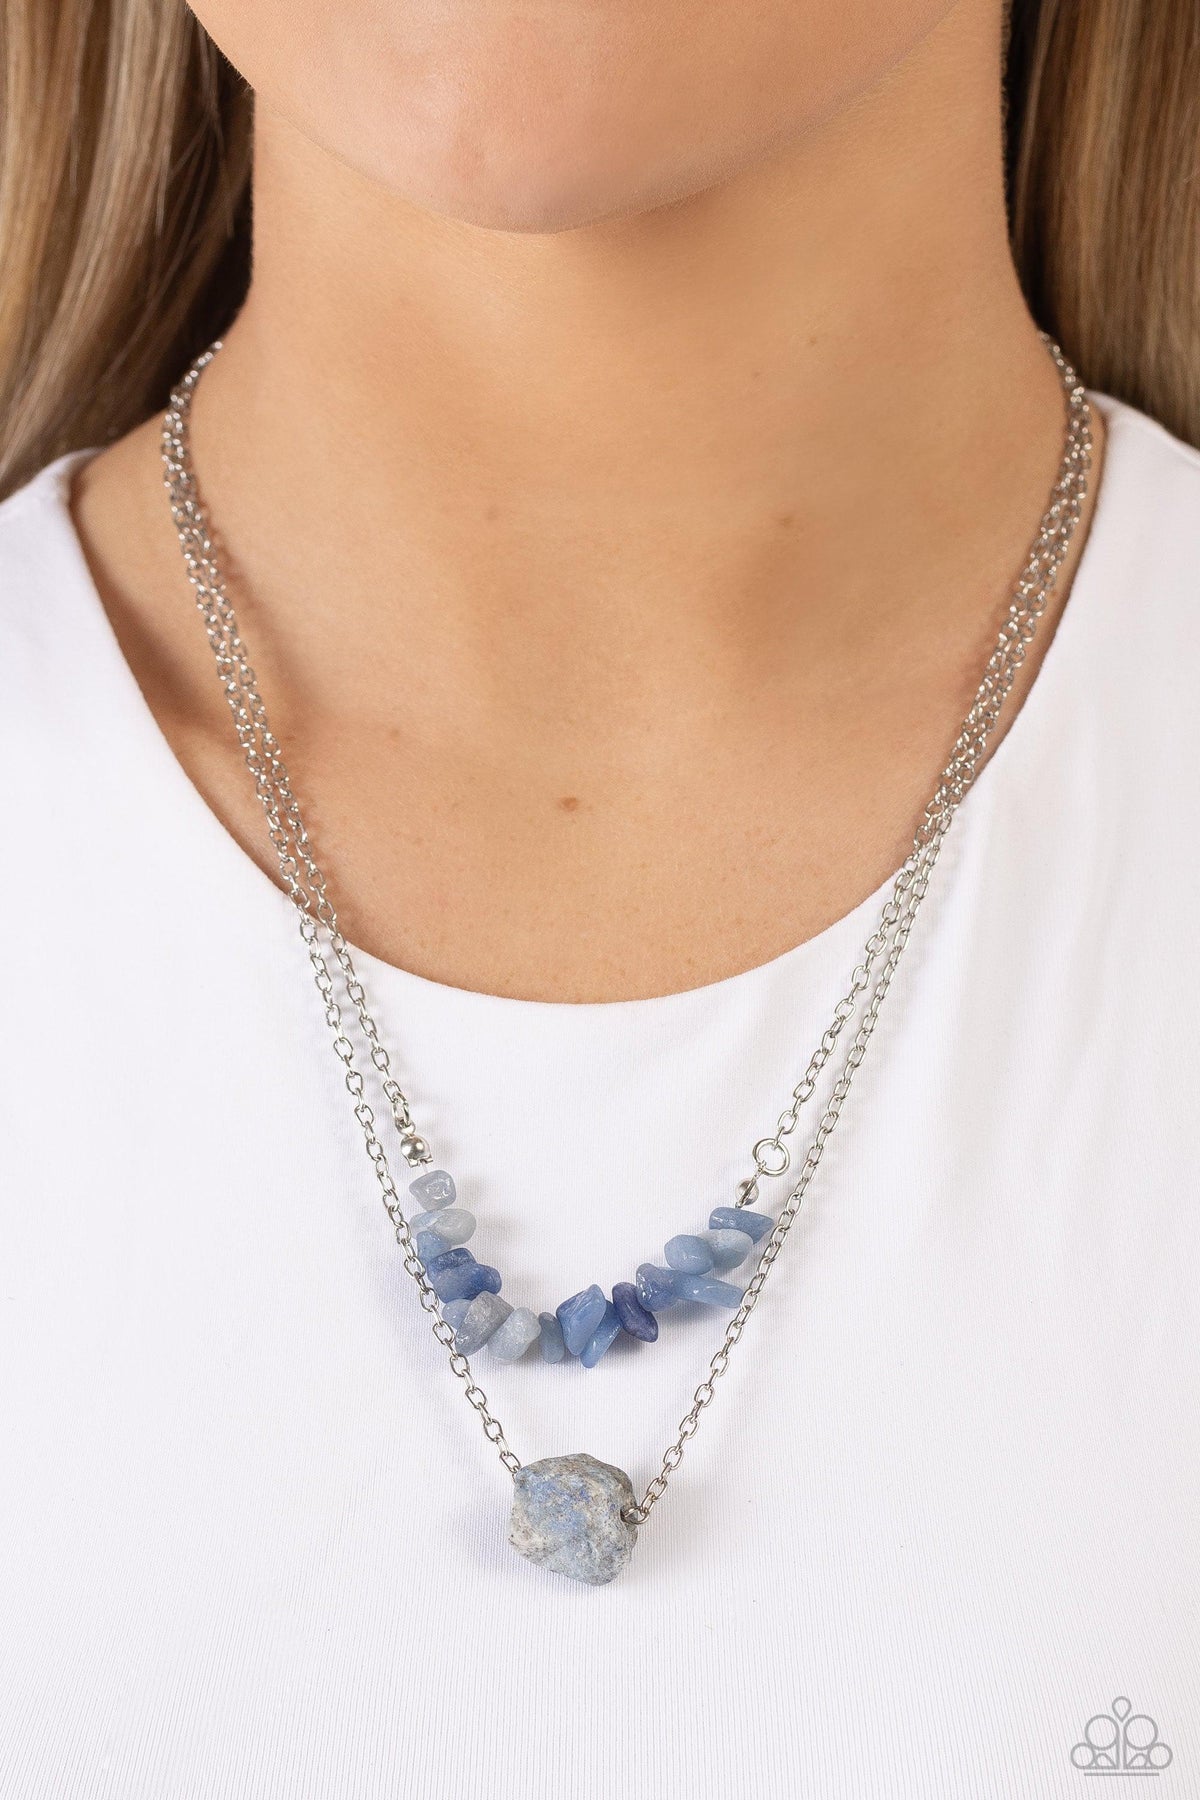 Chiseled Caliber Blue Lapis Stone Necklace - Paparazzi Accessories-on model - CarasShop.com - $5 Jewelry by Cara Jewels